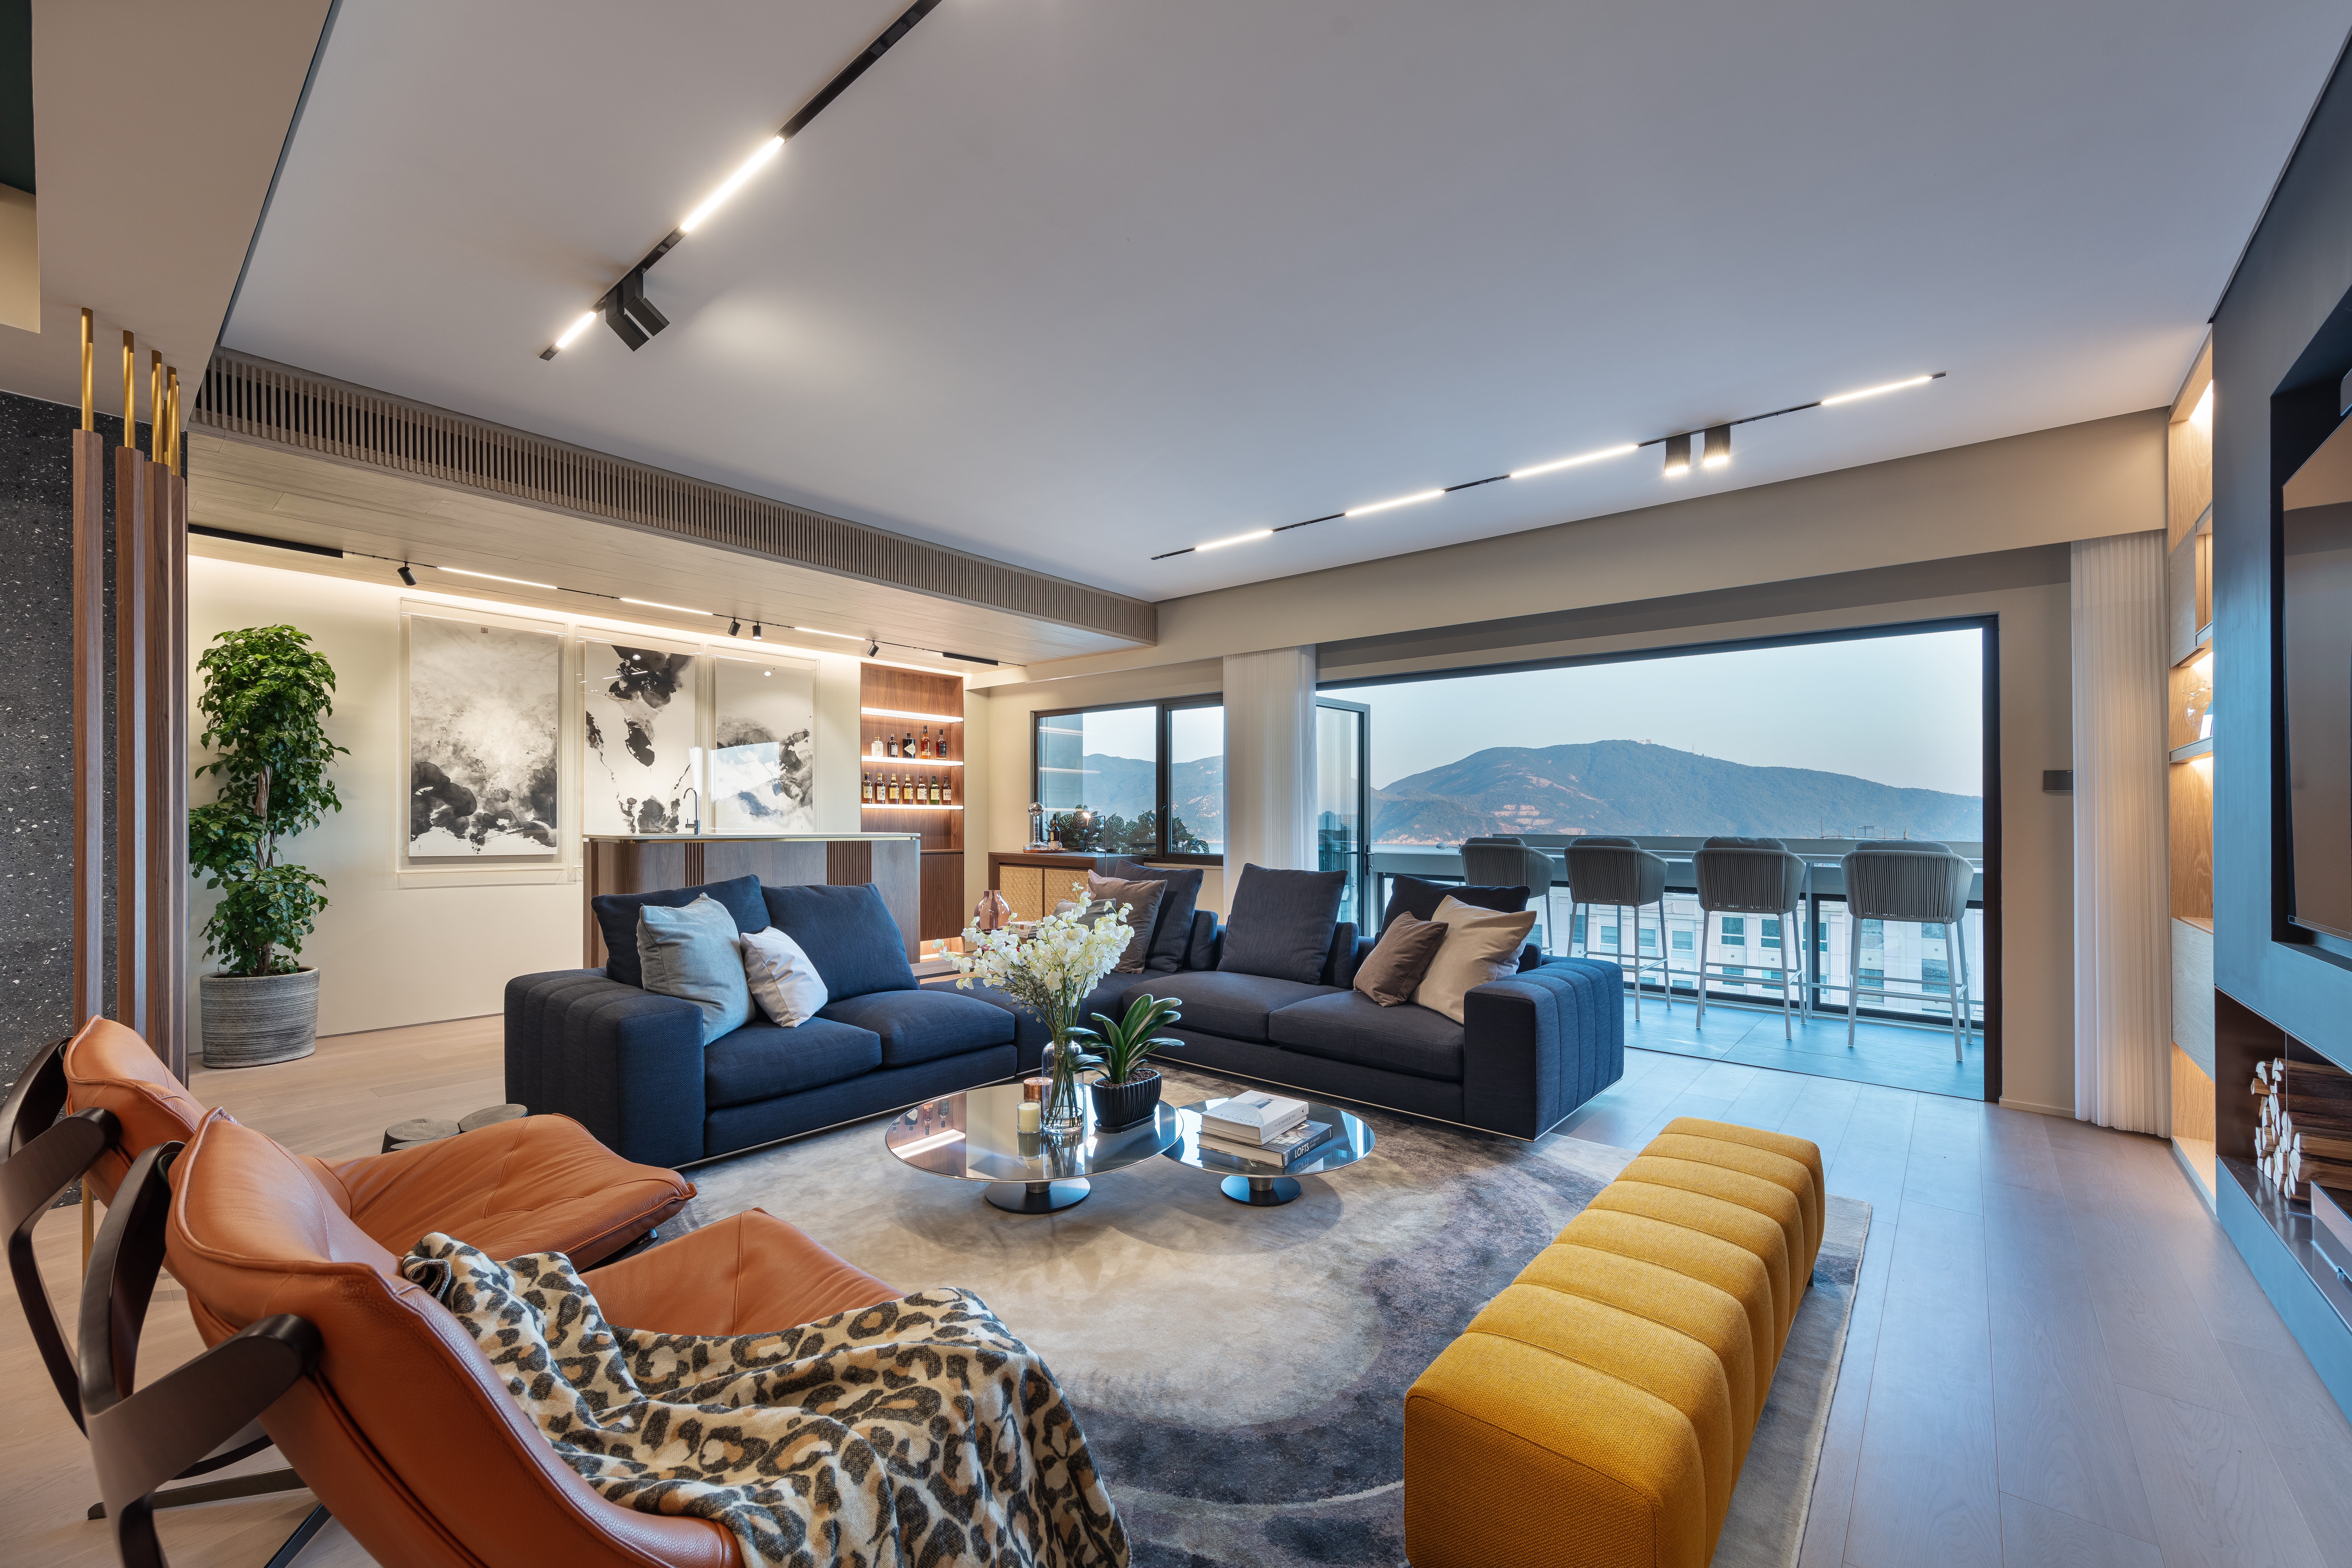 Designer Max Lam infused this Tai Tam home with the comfort and style of a ski lodge. Photo: Dick Liu